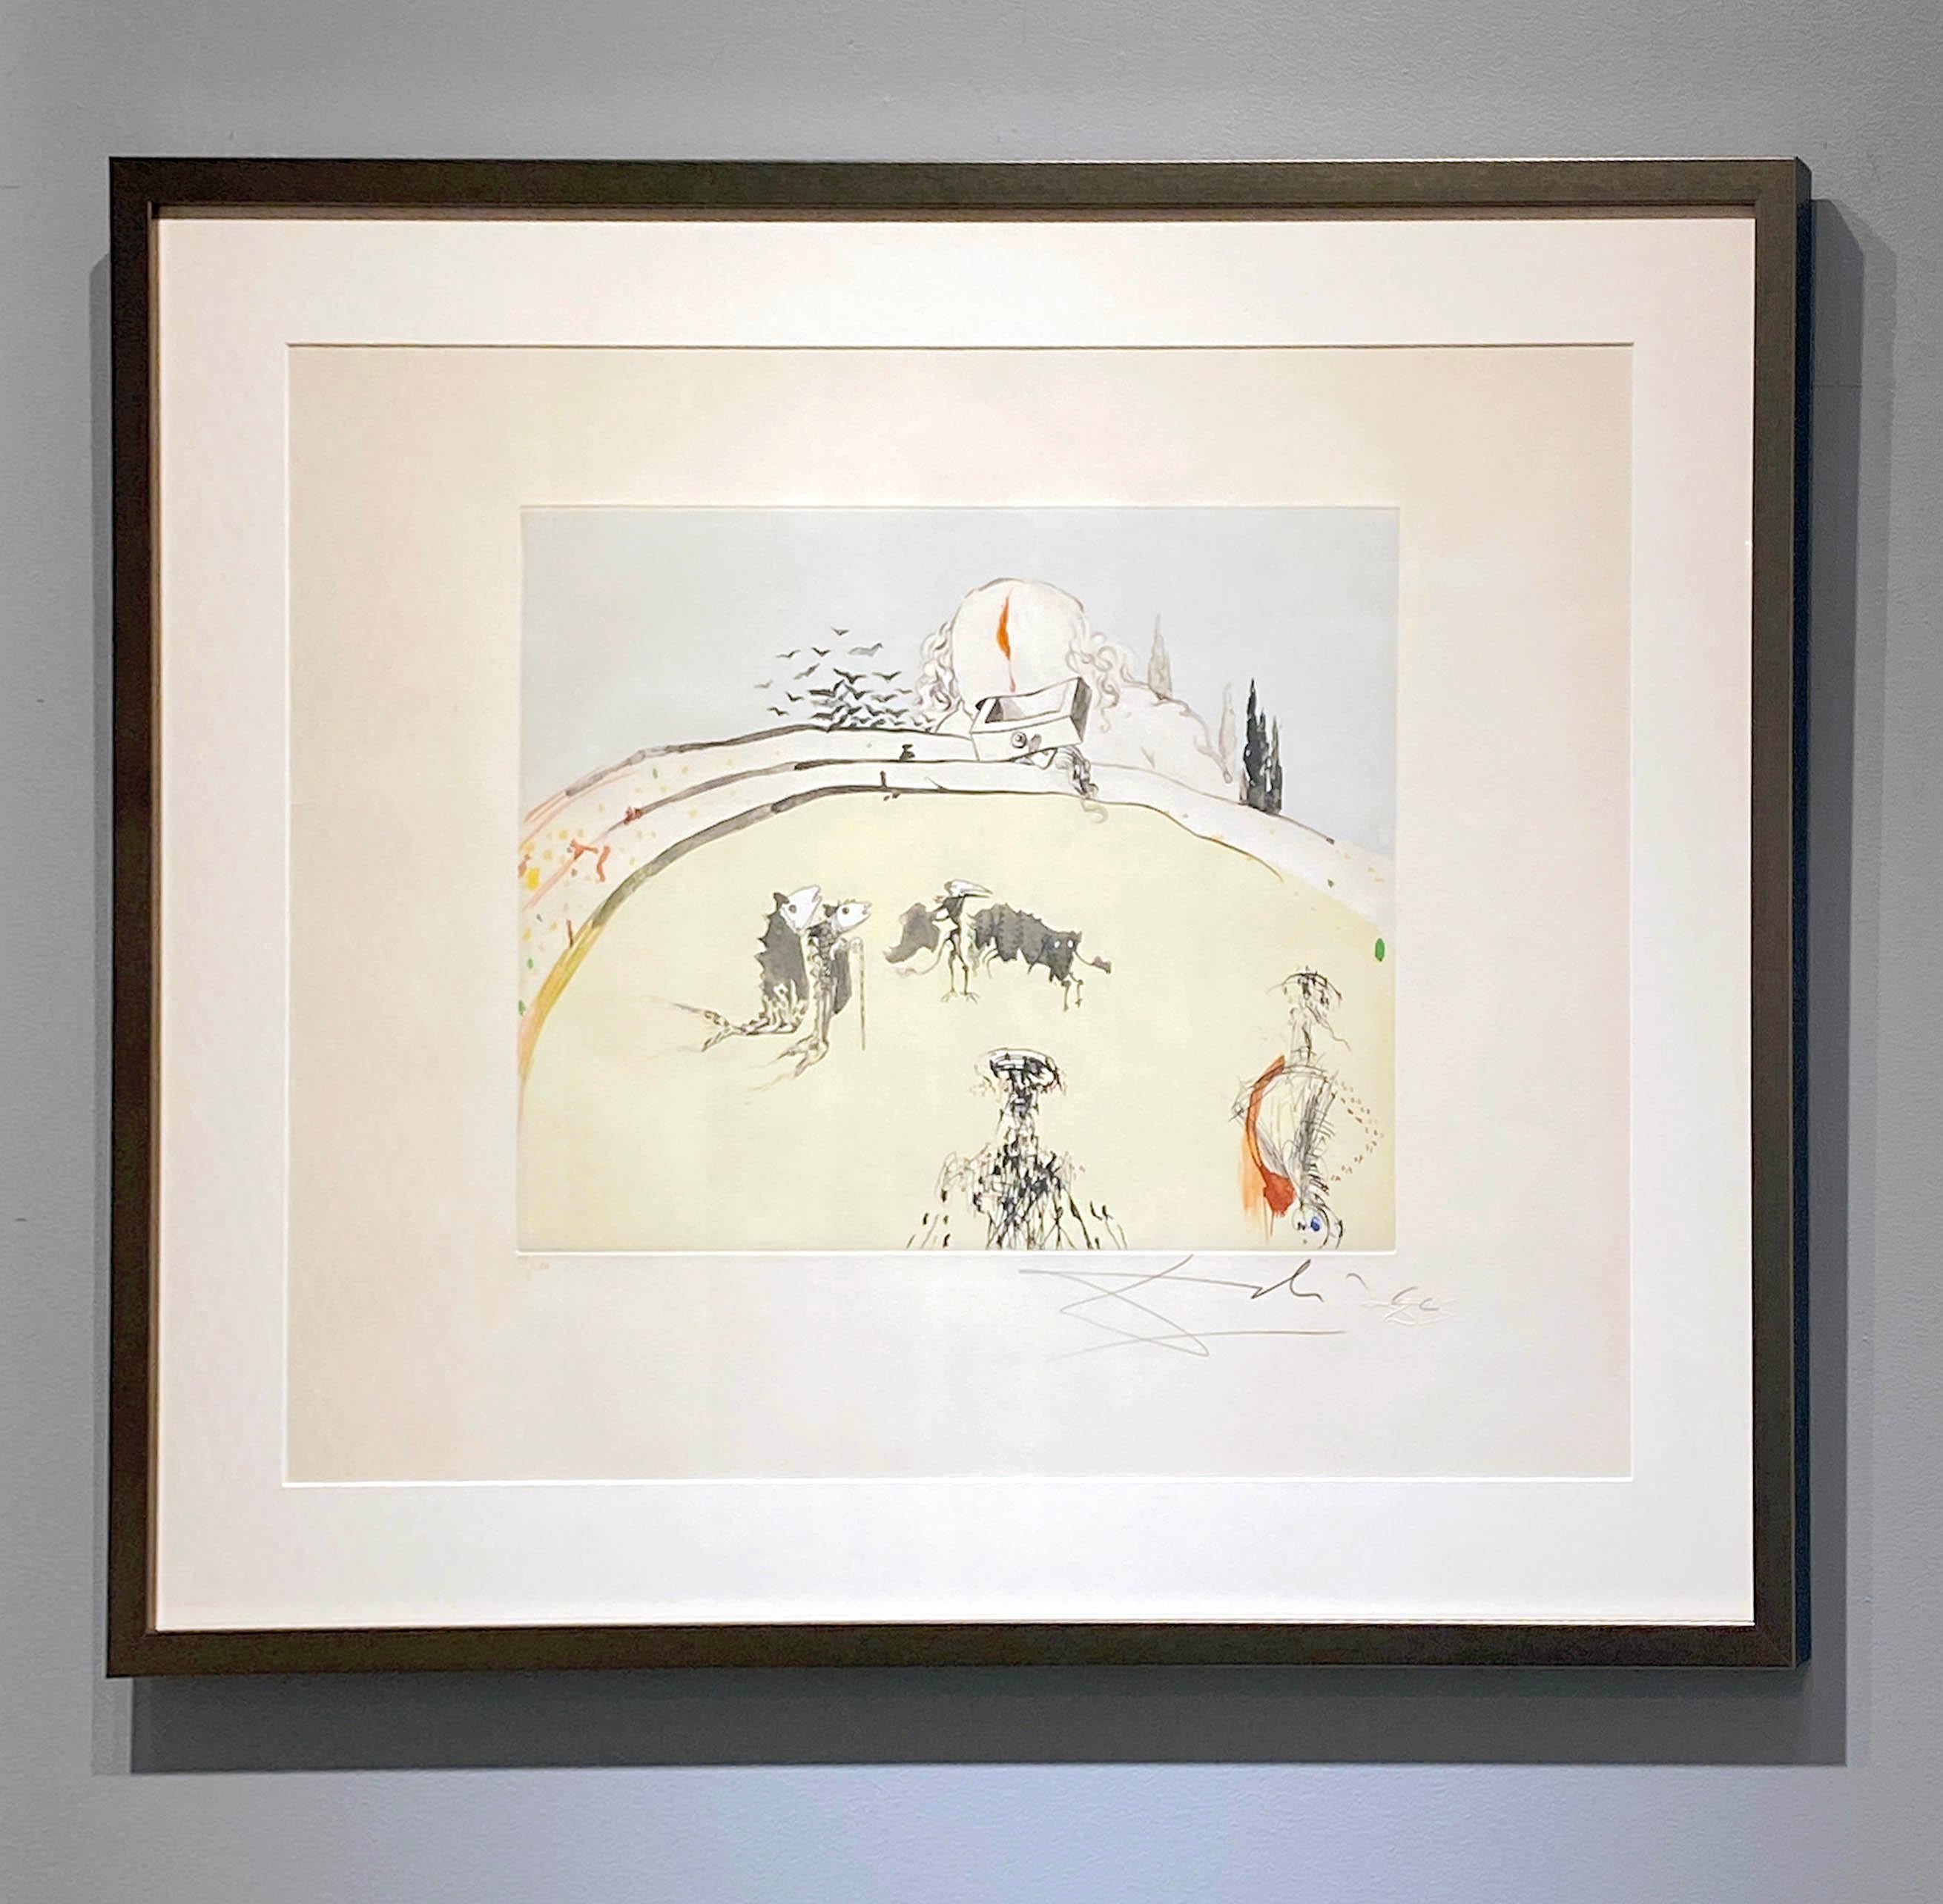 Bullfight with Drawer - Surrealist Print by Salvador Dalí